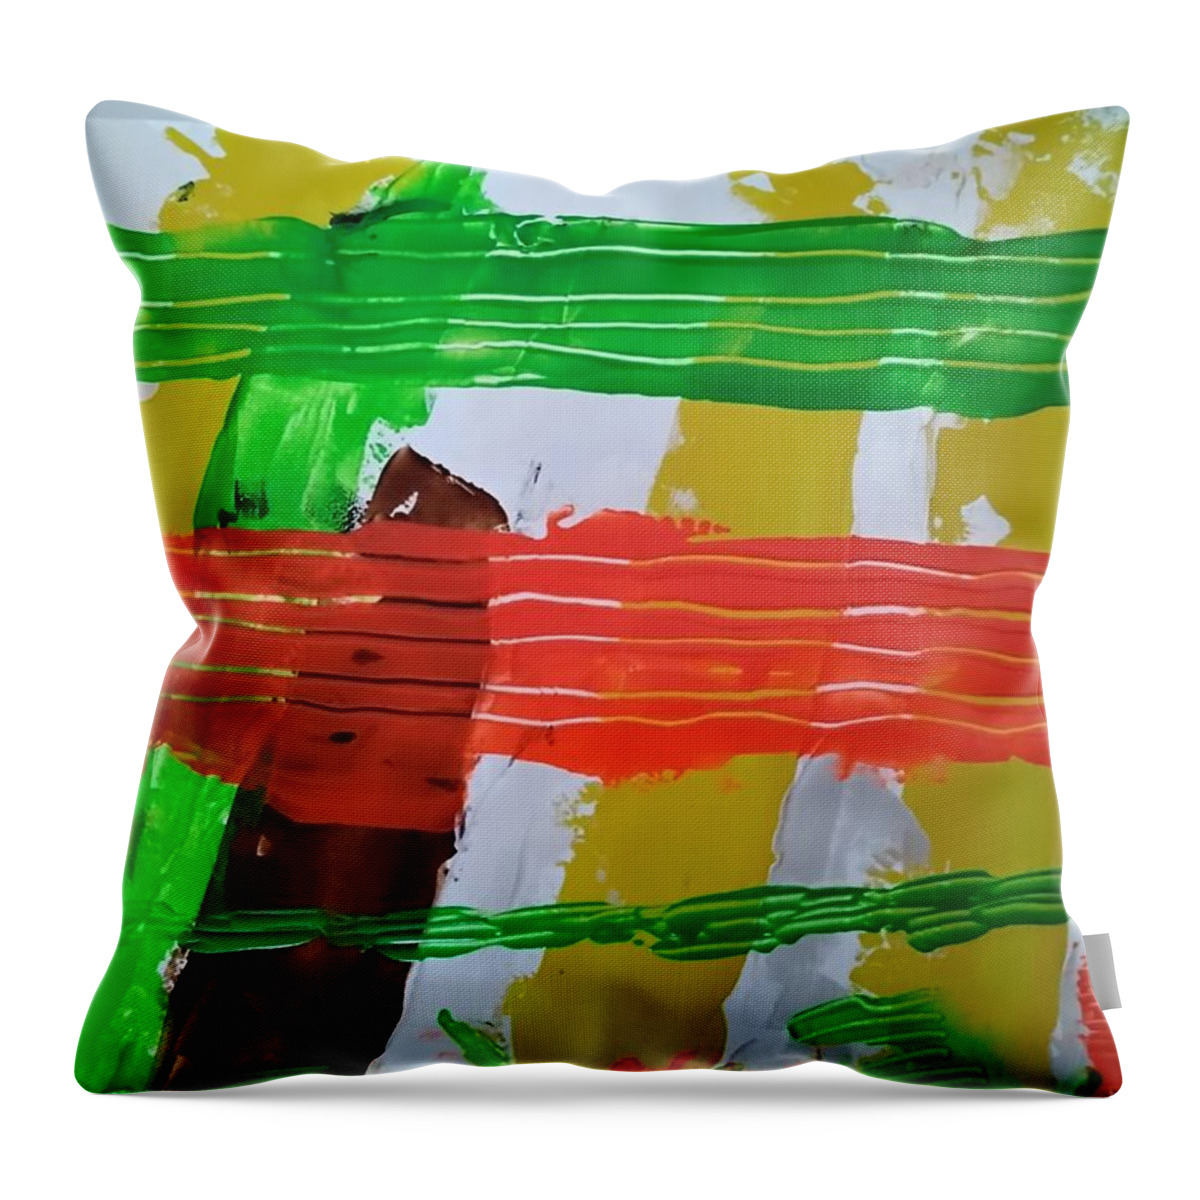  Throw Pillow featuring the painting Caos77 Open Artwork by Giuseppe Monti